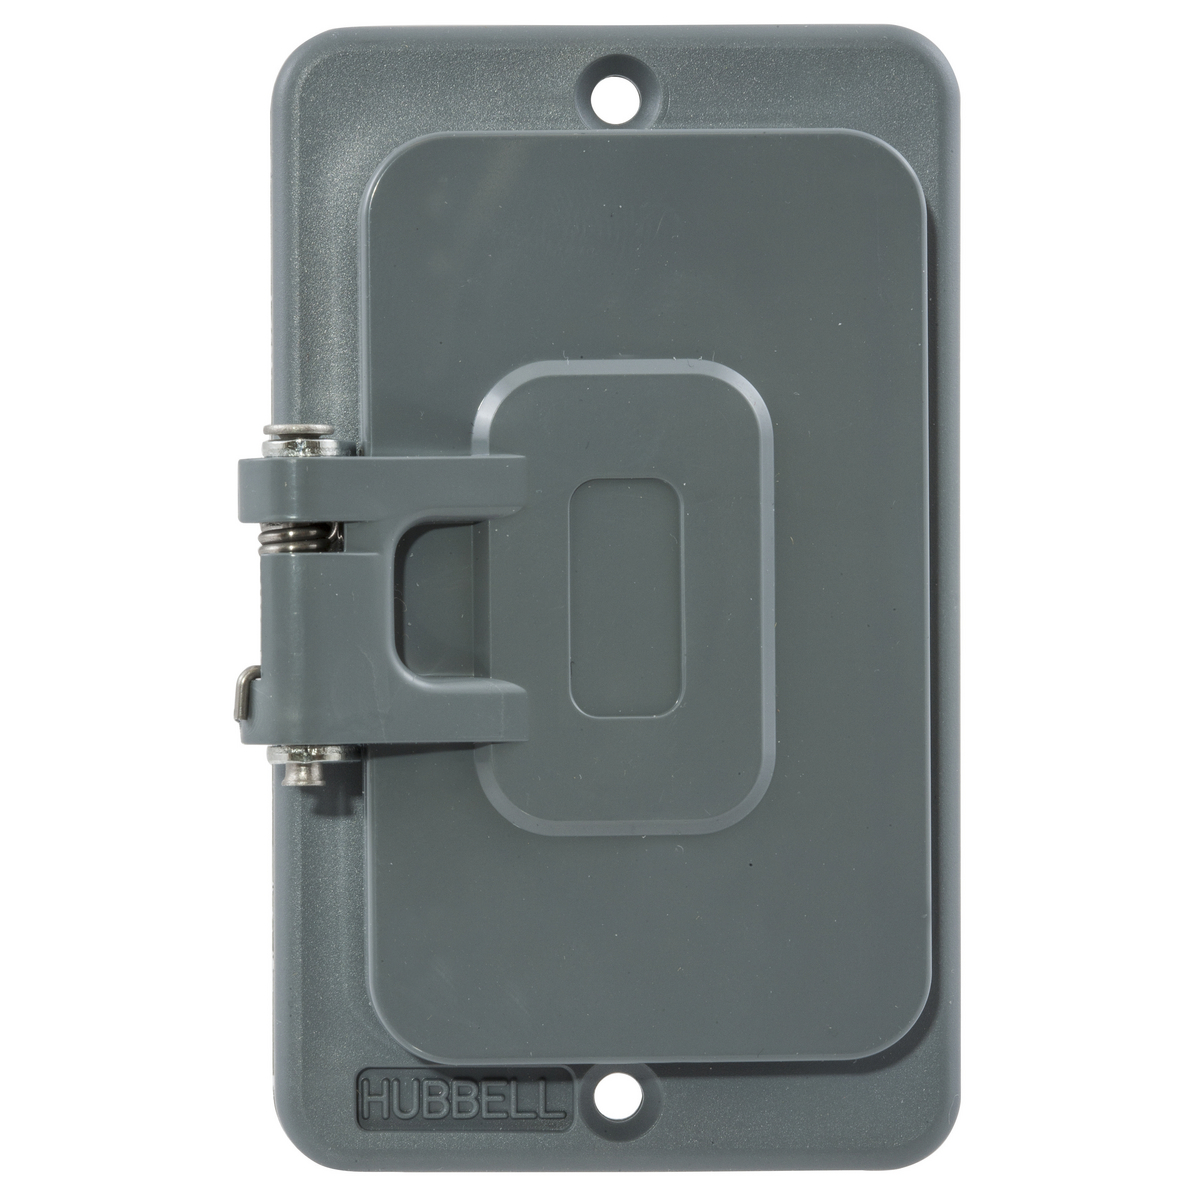 OUTLET BOX COVERPLATE, GFCI OPENING